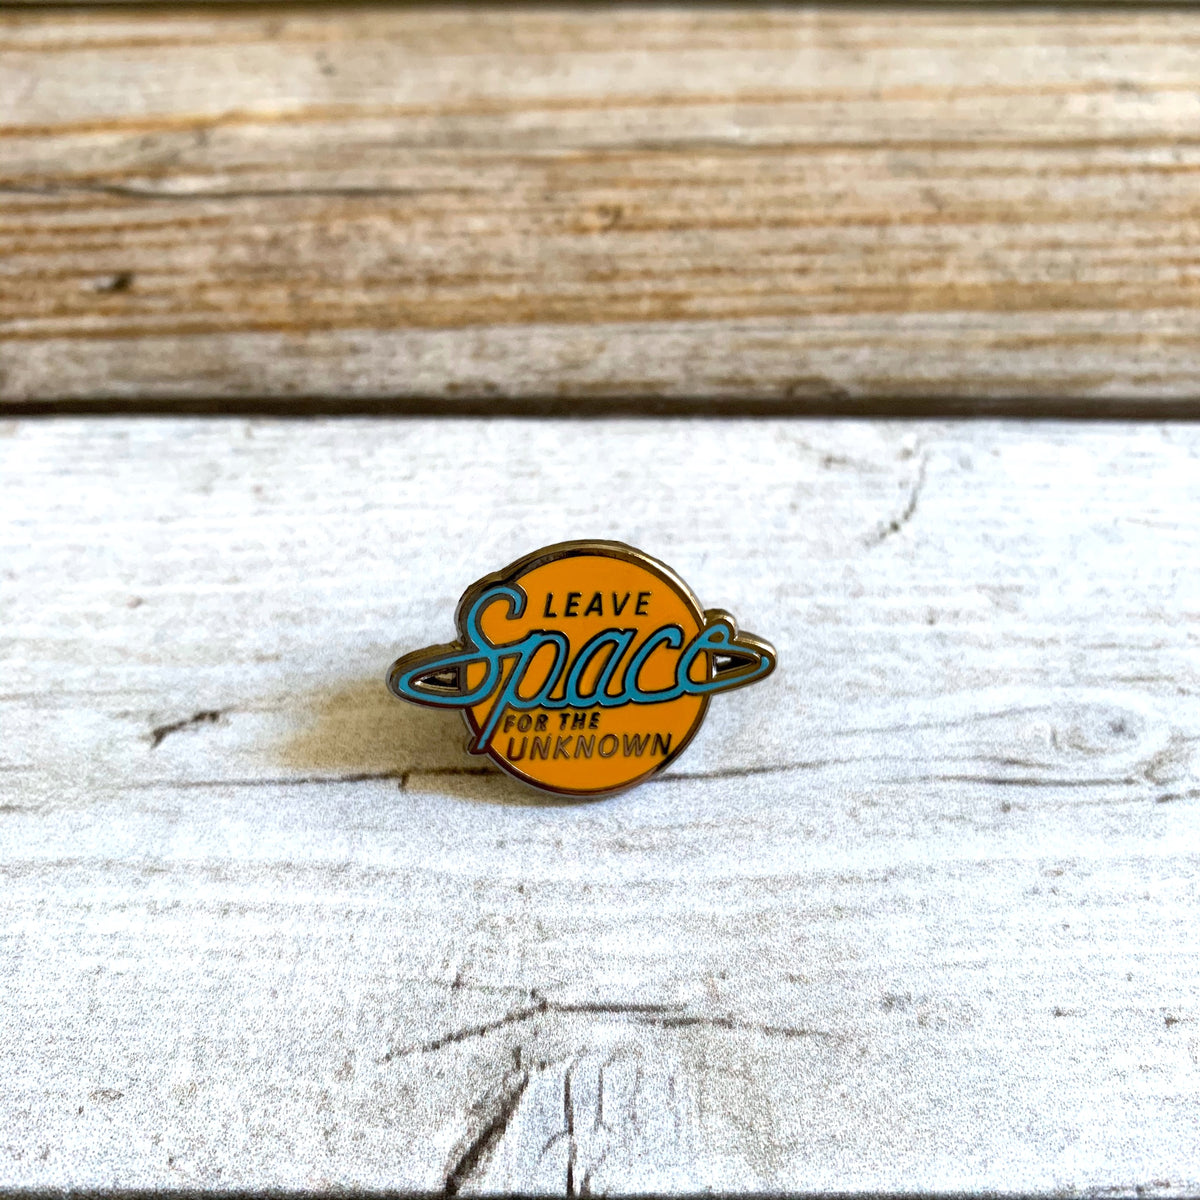 [BK Original Pin] Leave Space for the Unknown